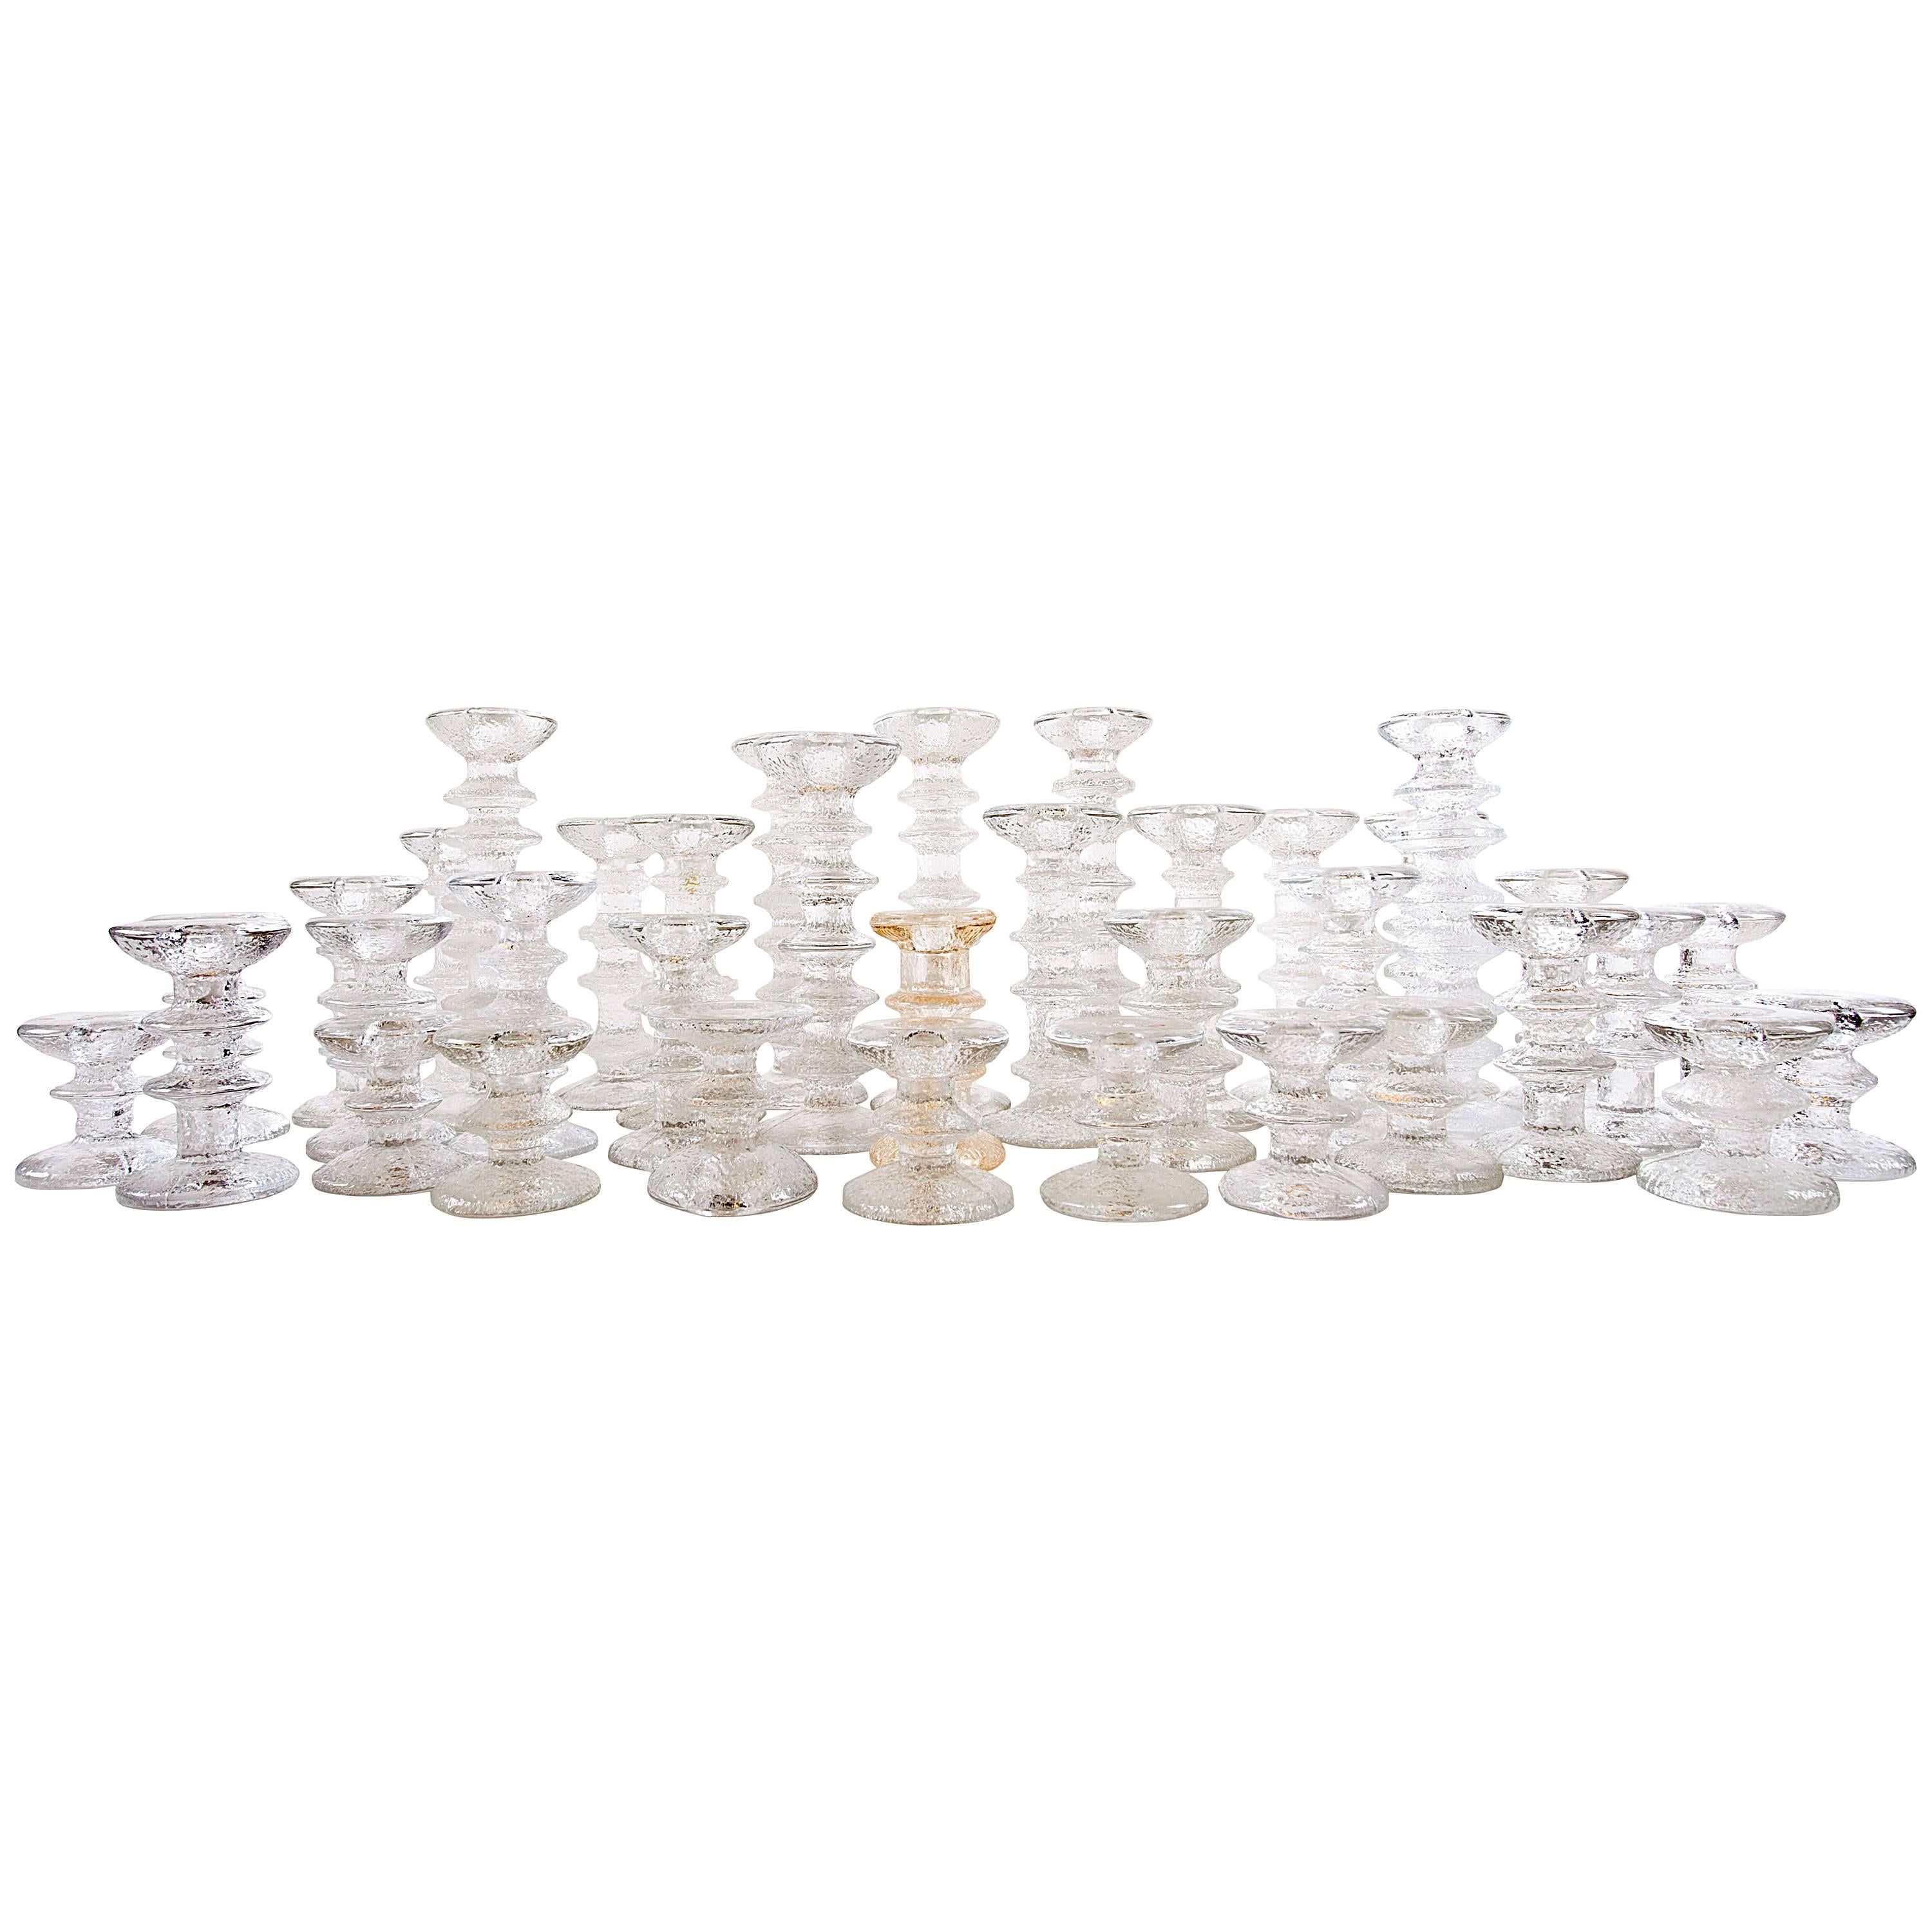 Collection of 36 "ice crystal" candleholders by Sarpaneva for iittala of Finland